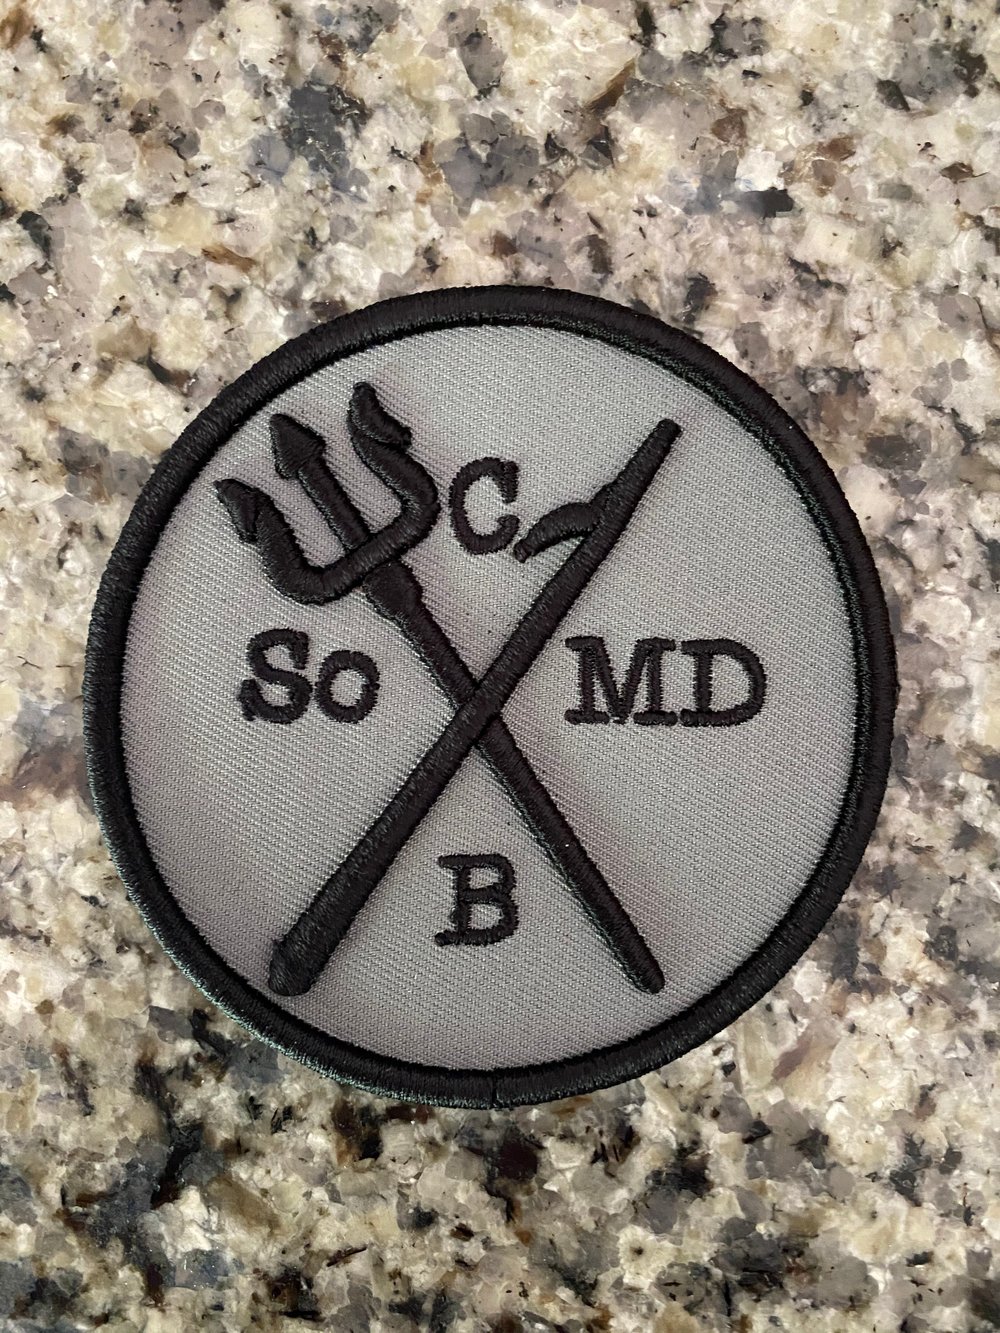 BVSoMD & CBBV 1 Year Anniversary Collab Patch